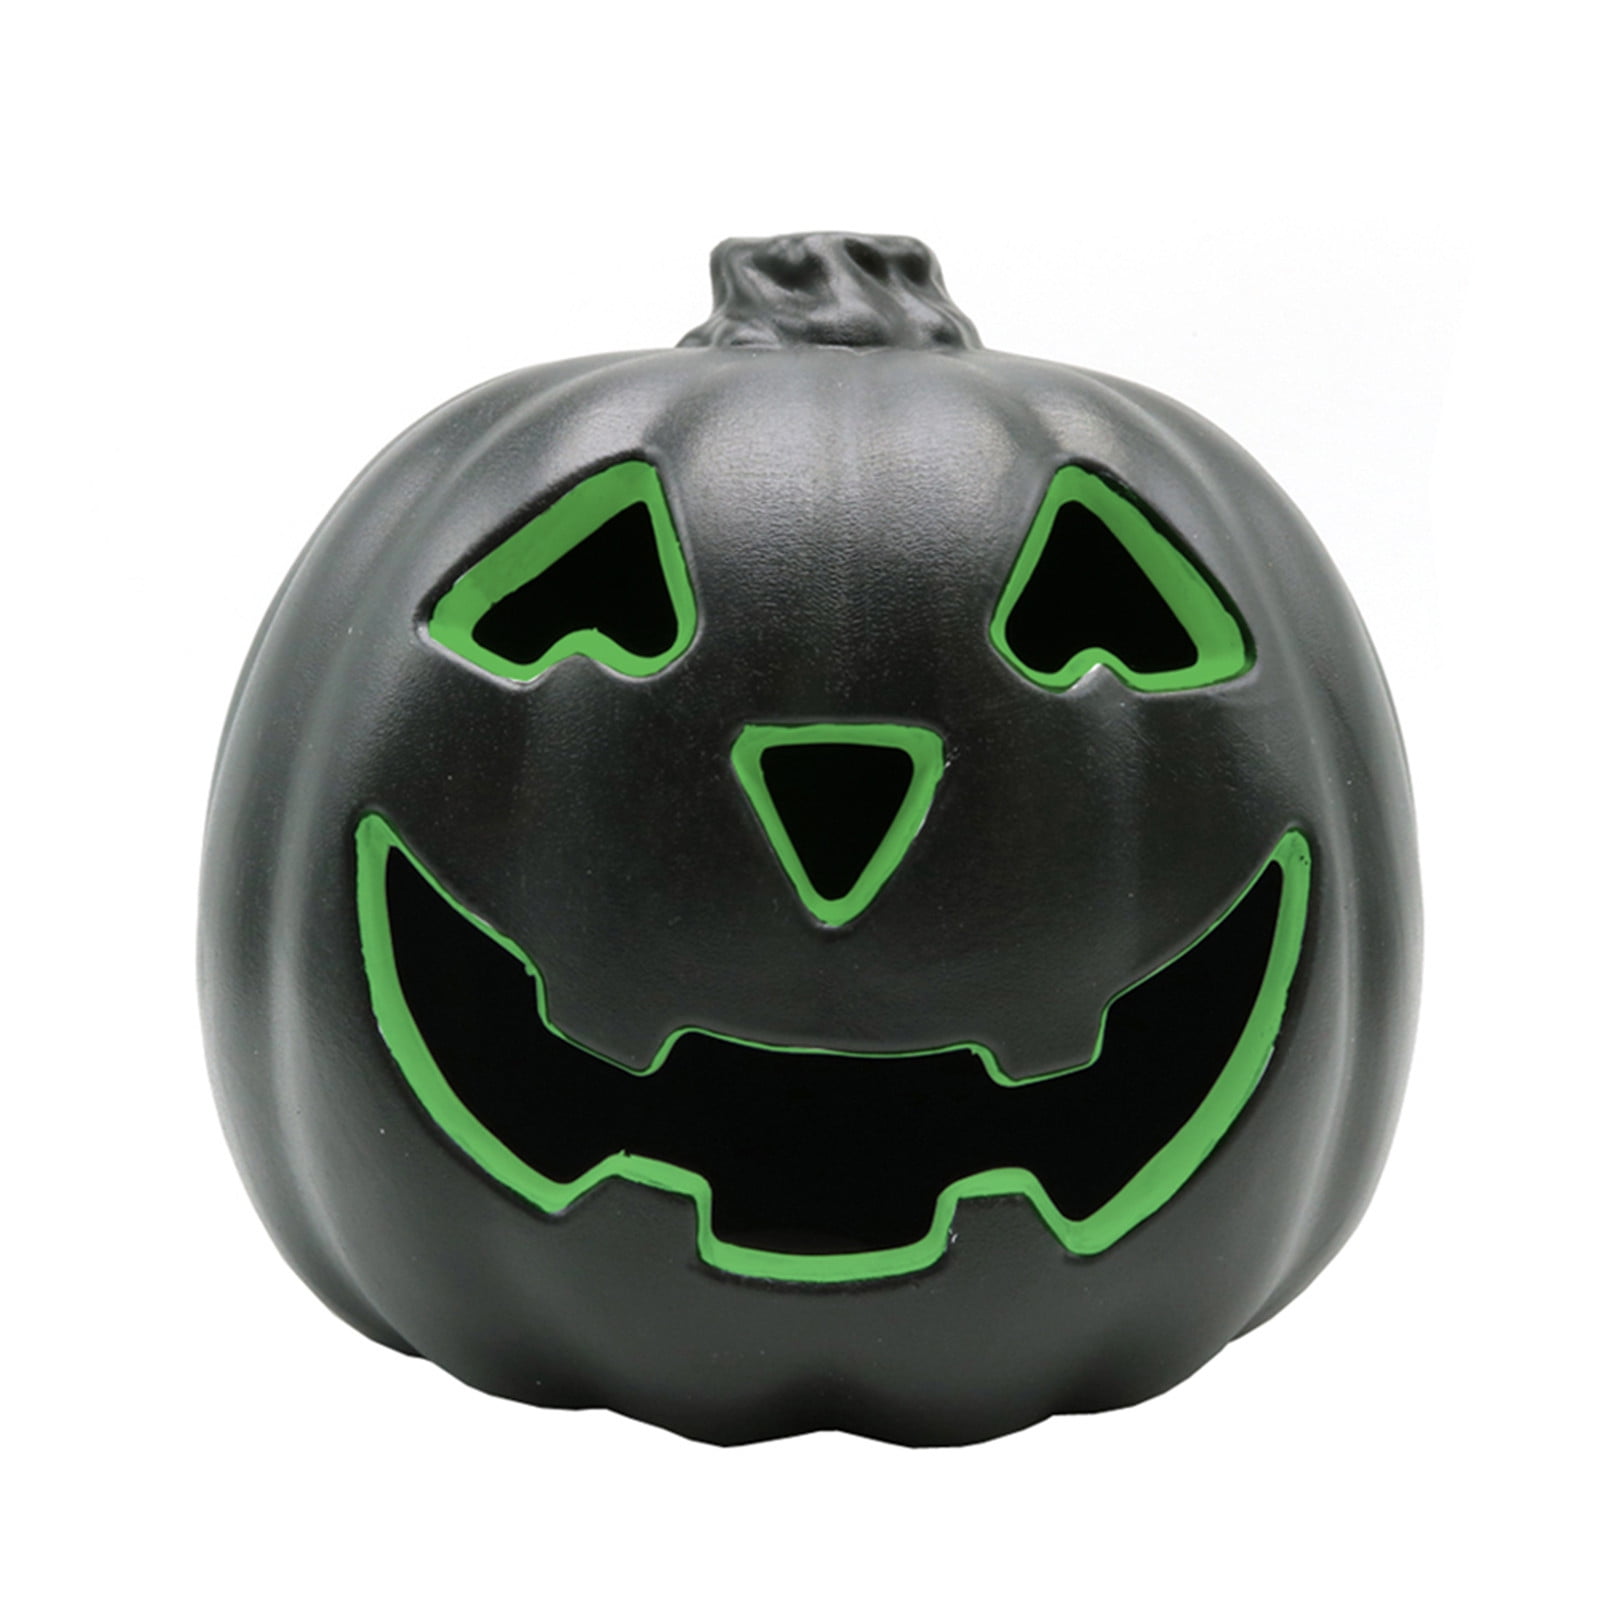 Lego NEW Halloween Accessories Spiders AND MORE! Skeletons Ghosts Pumpkins 